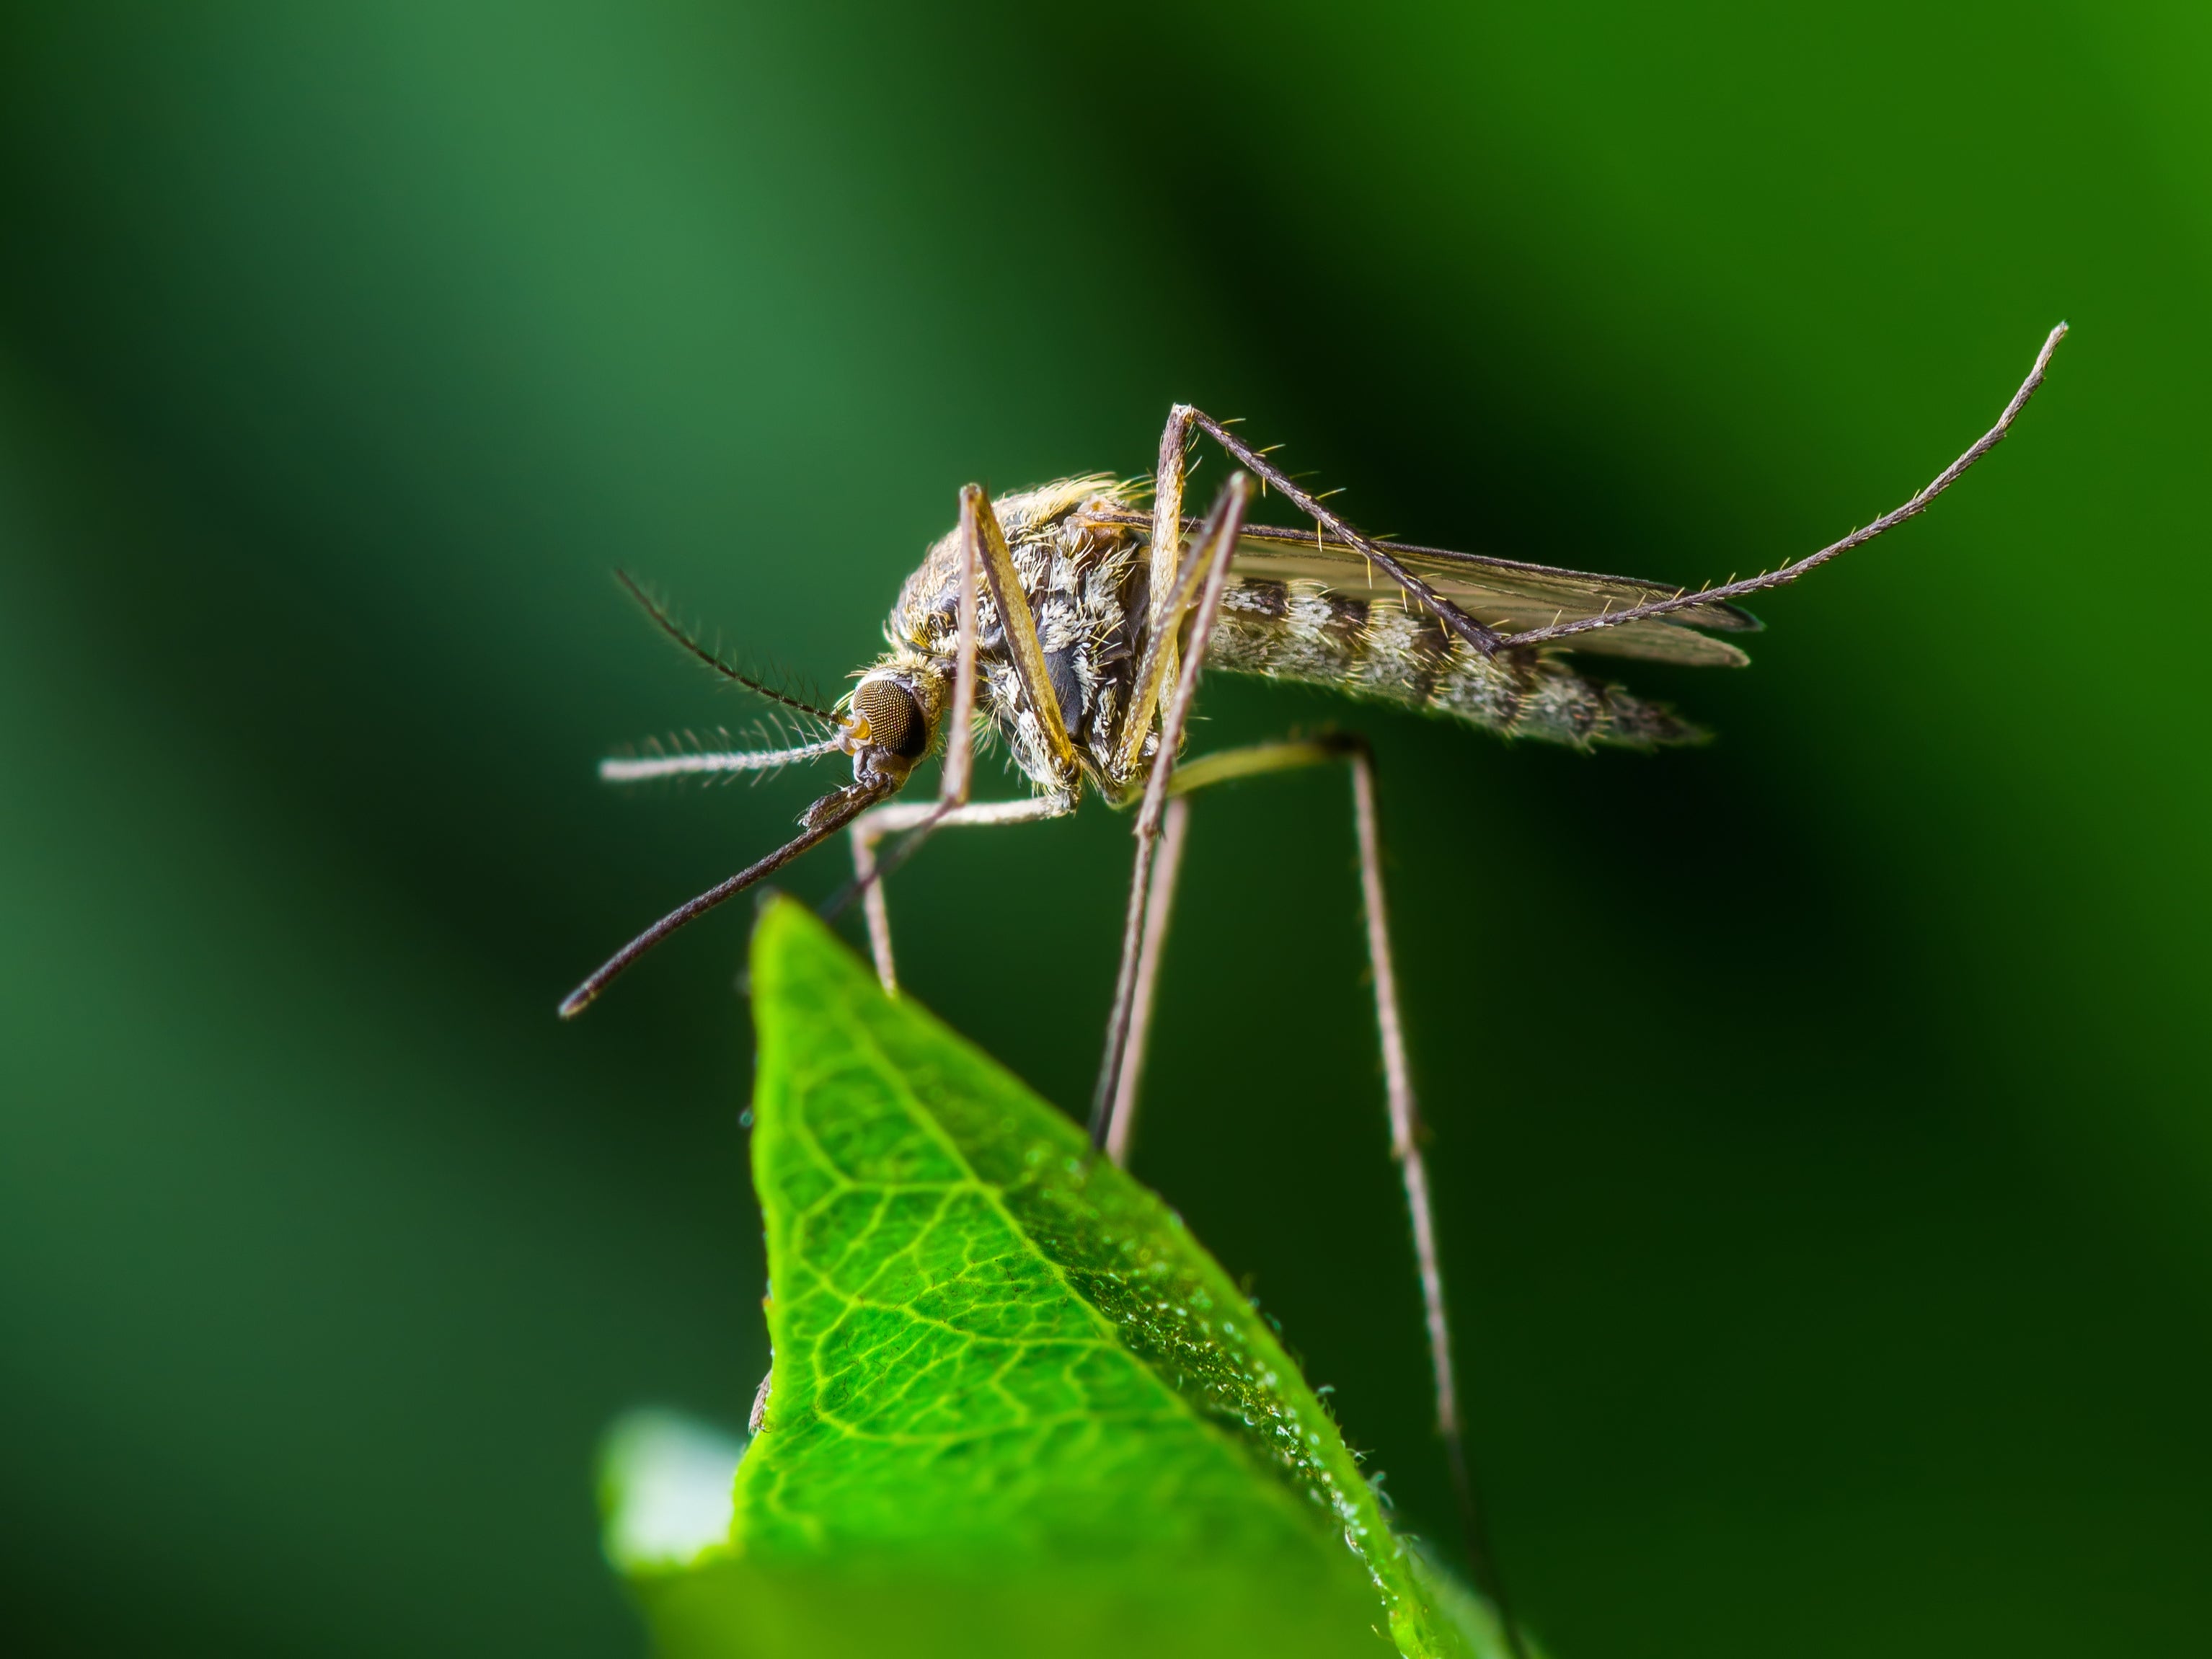 Mosquitoes with a certain bacteria were introduced into Indonesian communities as part of a trial